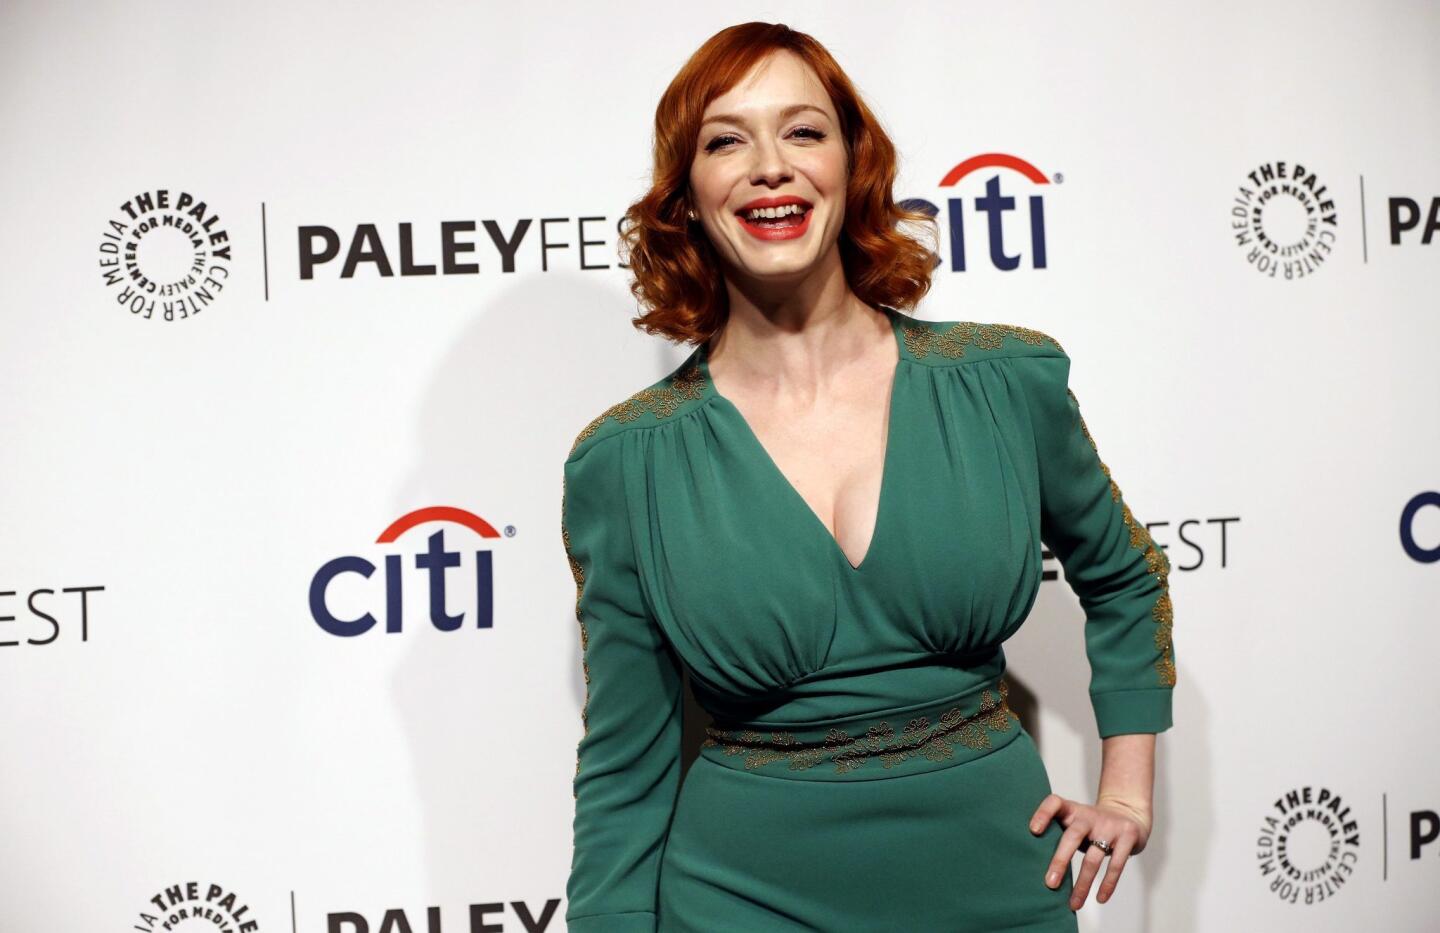 Cast member Hendricks arrives for a panel discussion for TV series "Mad Men" during PaleyFest in Hollywood